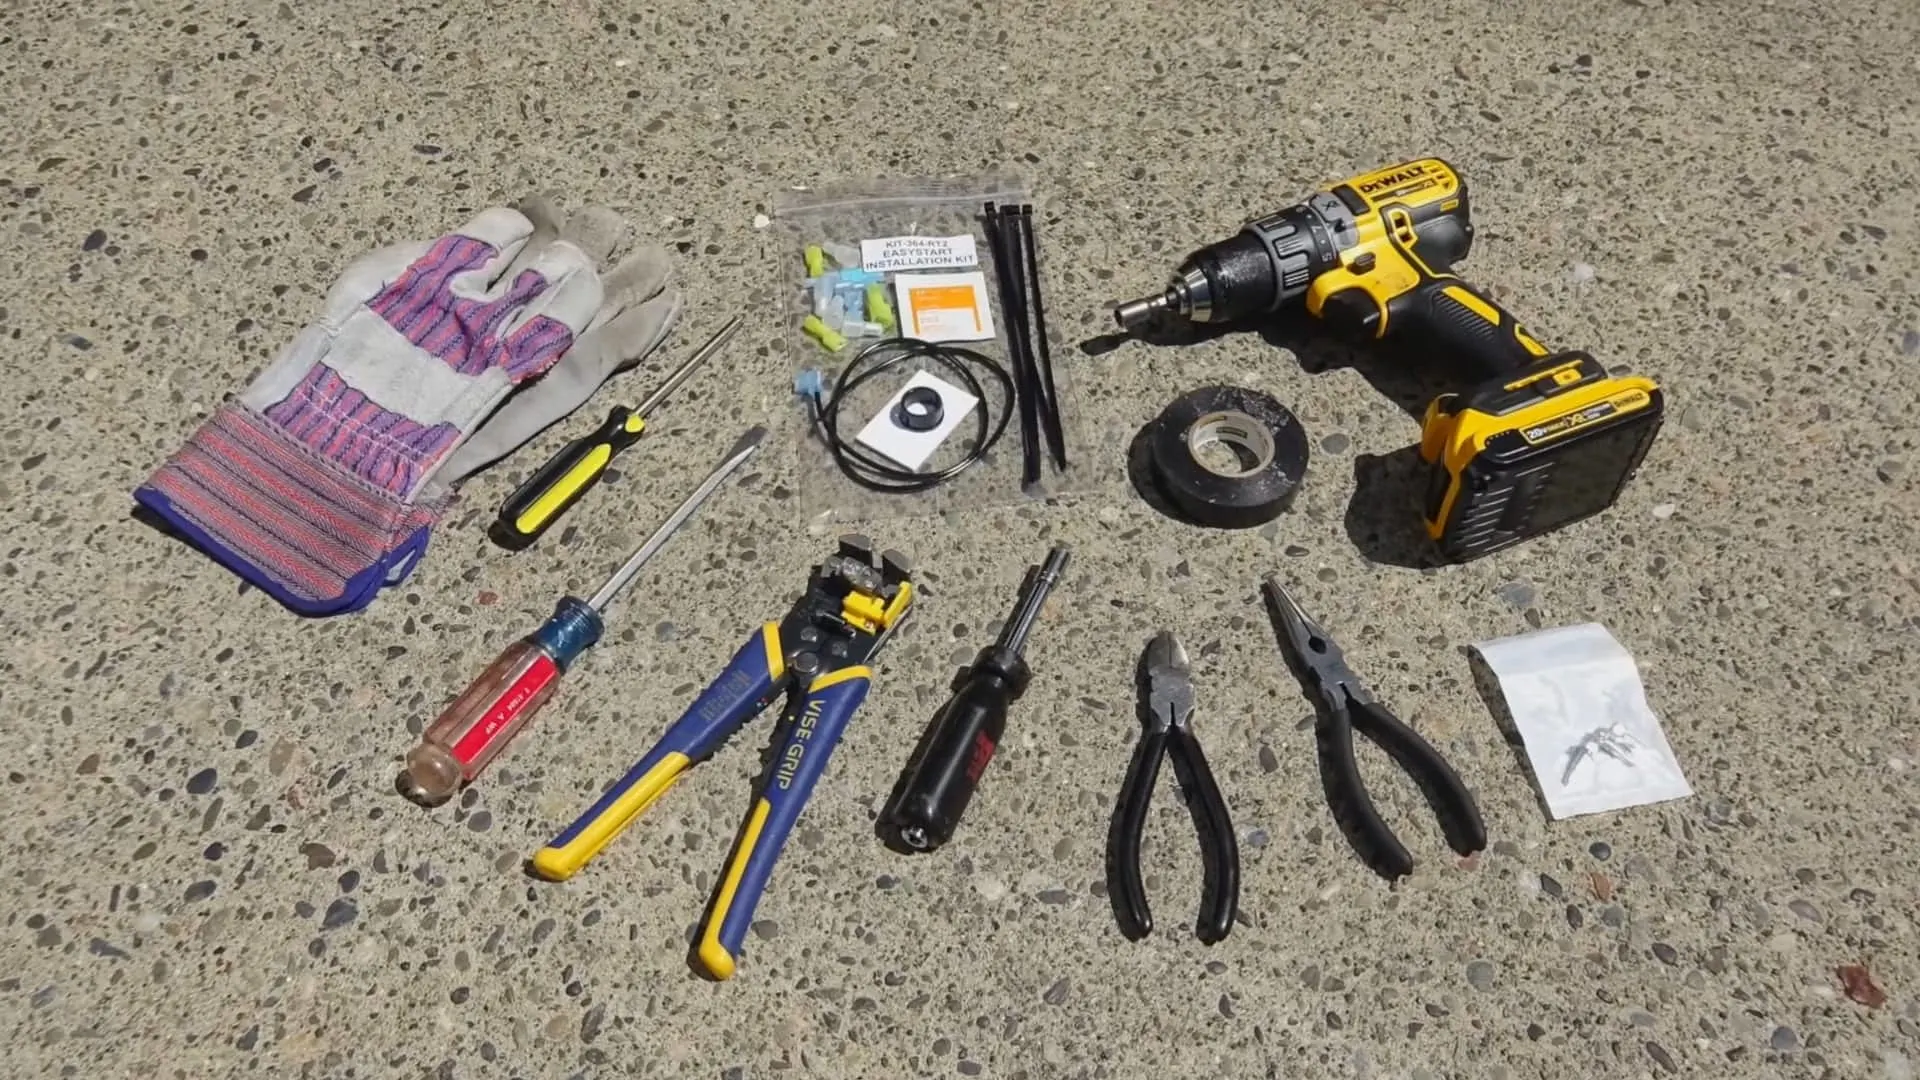 RV newbies should always carry a basic tool kit.